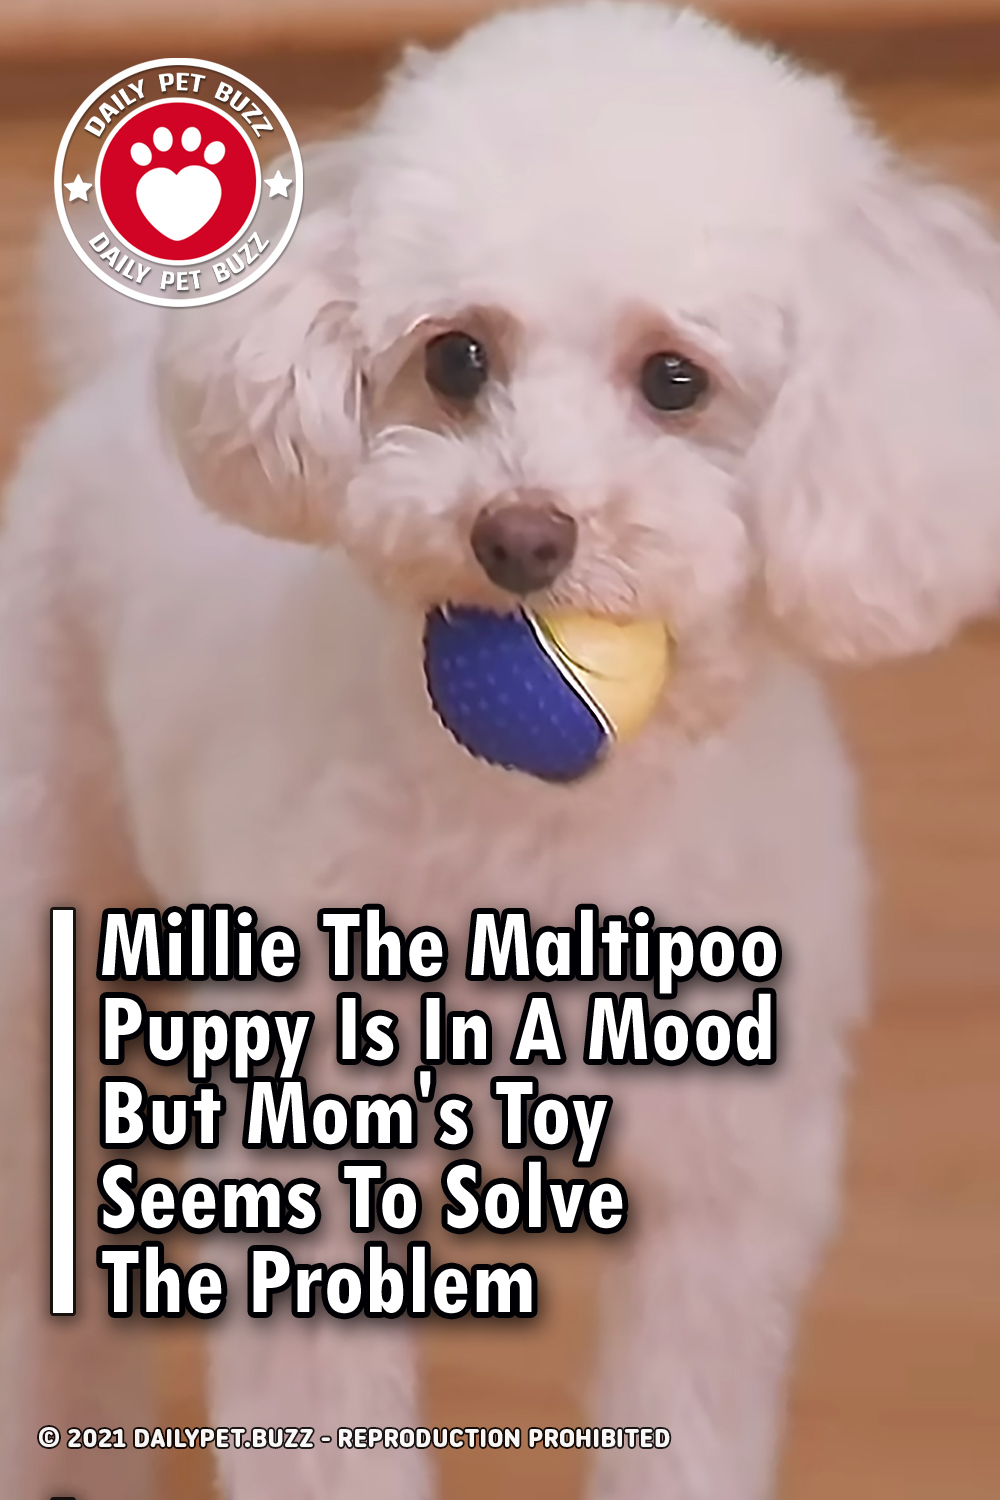 Millie The Maltipoo Puppy Is In A Mood But Mom\'s Toy Seems To Solve The Problem